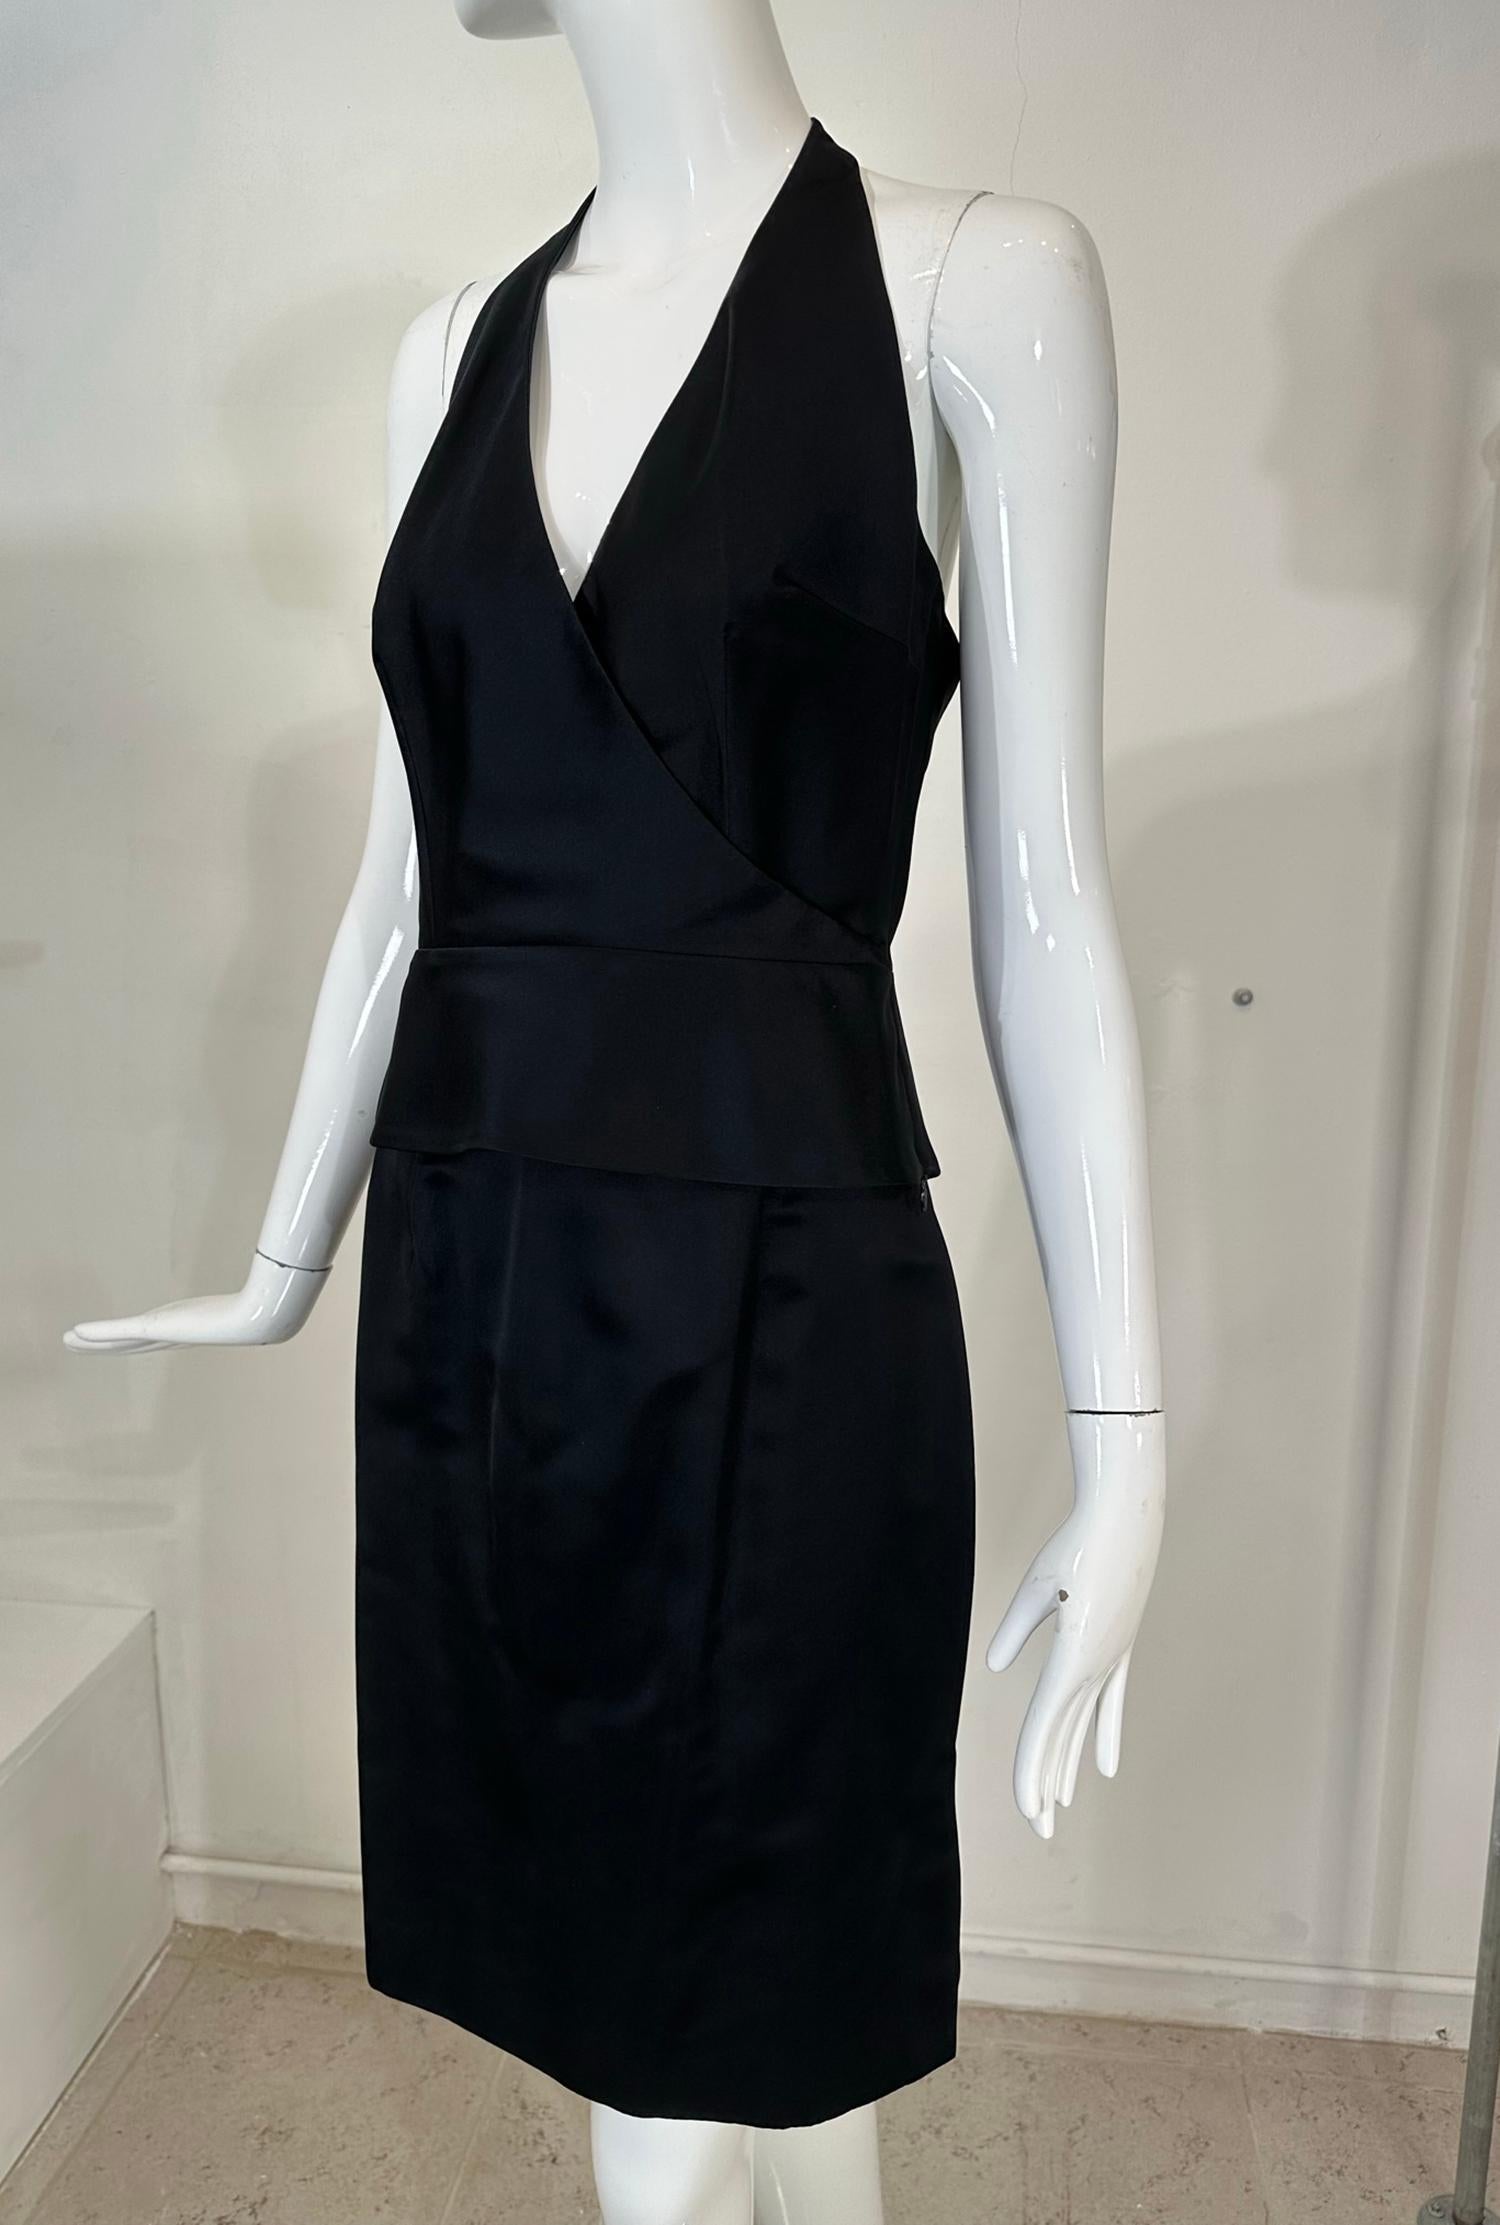 Richard Tyler Couture black silk satin halter neck, peplum hem top & matching pencil skirt with a center back hem vent, each marked size 6. From the early 2000s. The top has a surplice neckline, a seamed waist and a peplum hem, closing at the neck